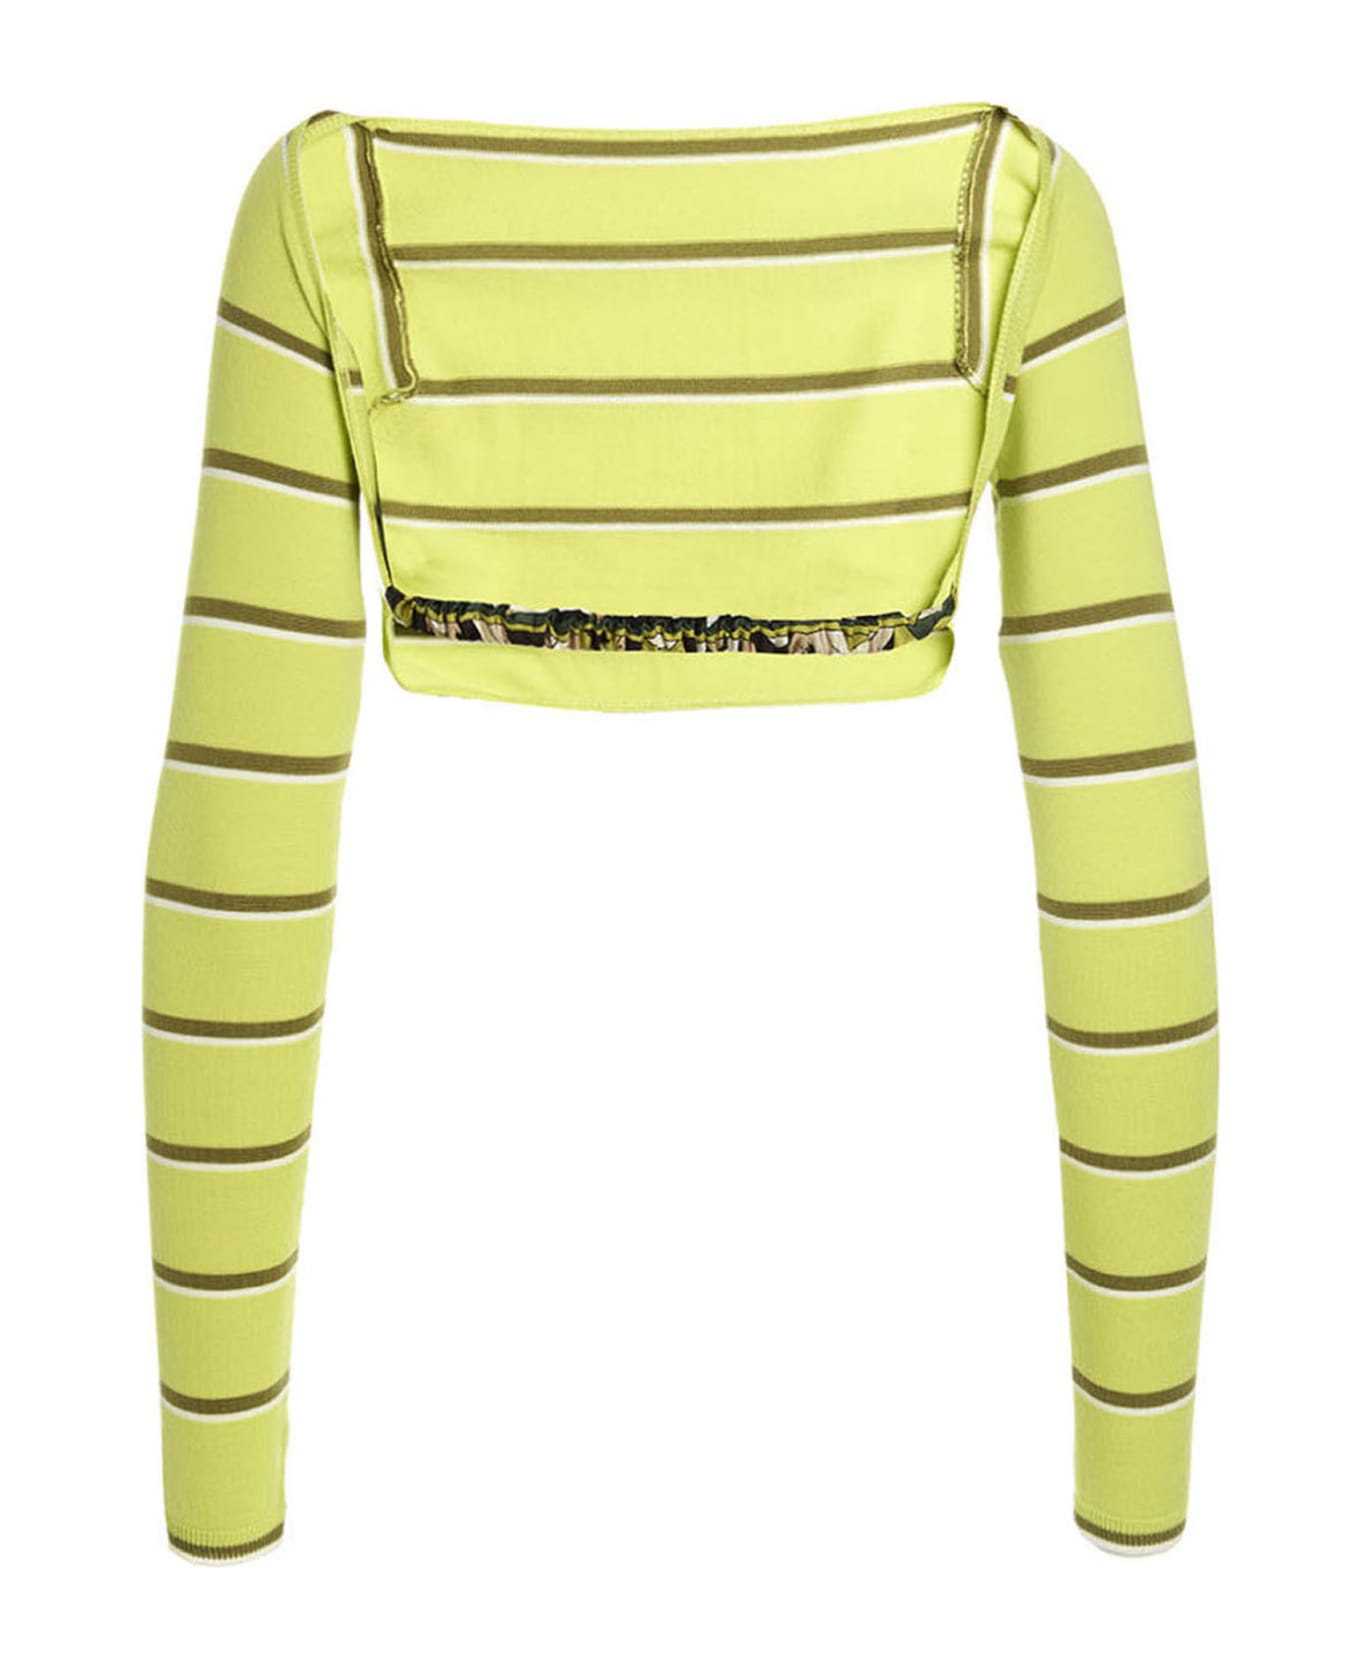 Pucci Cut-out Cropped Sweater - Green ニットウェア